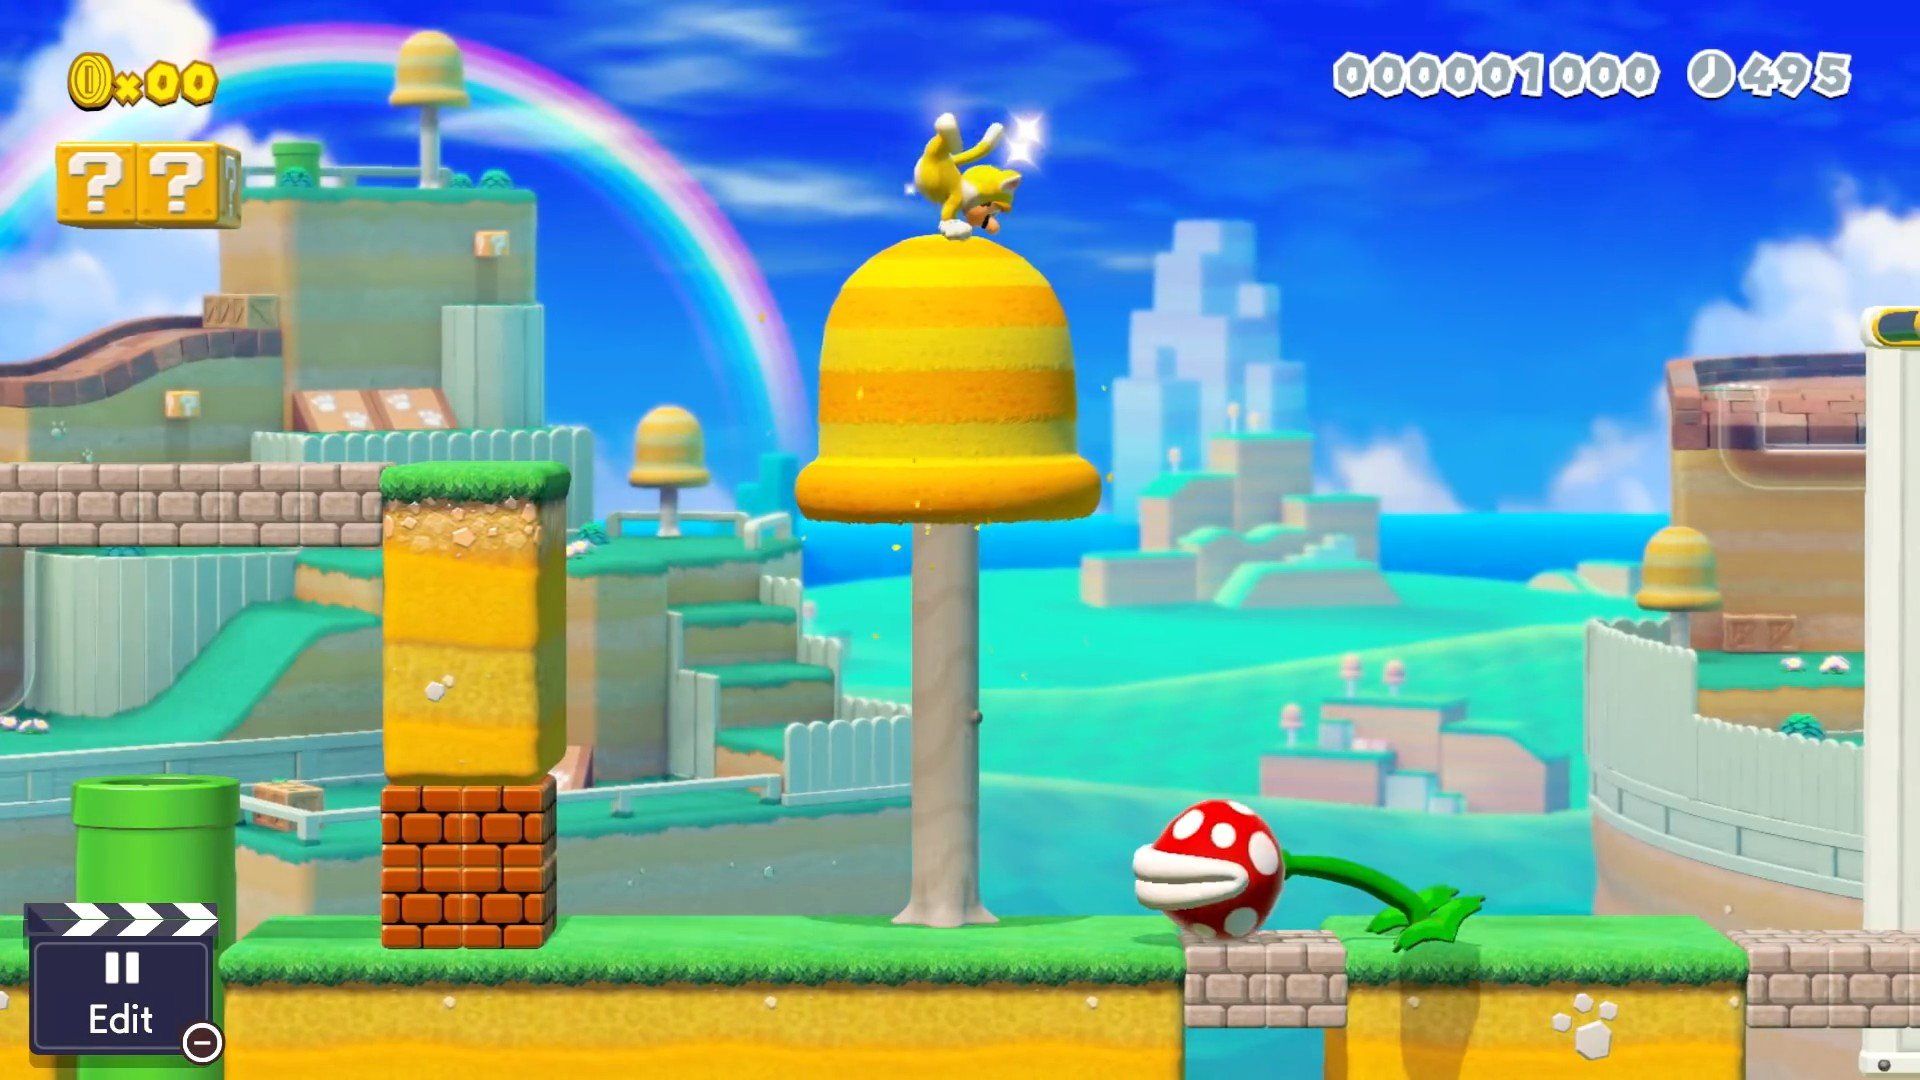 Super Mario Maker 2 now lets players upload 64 levels